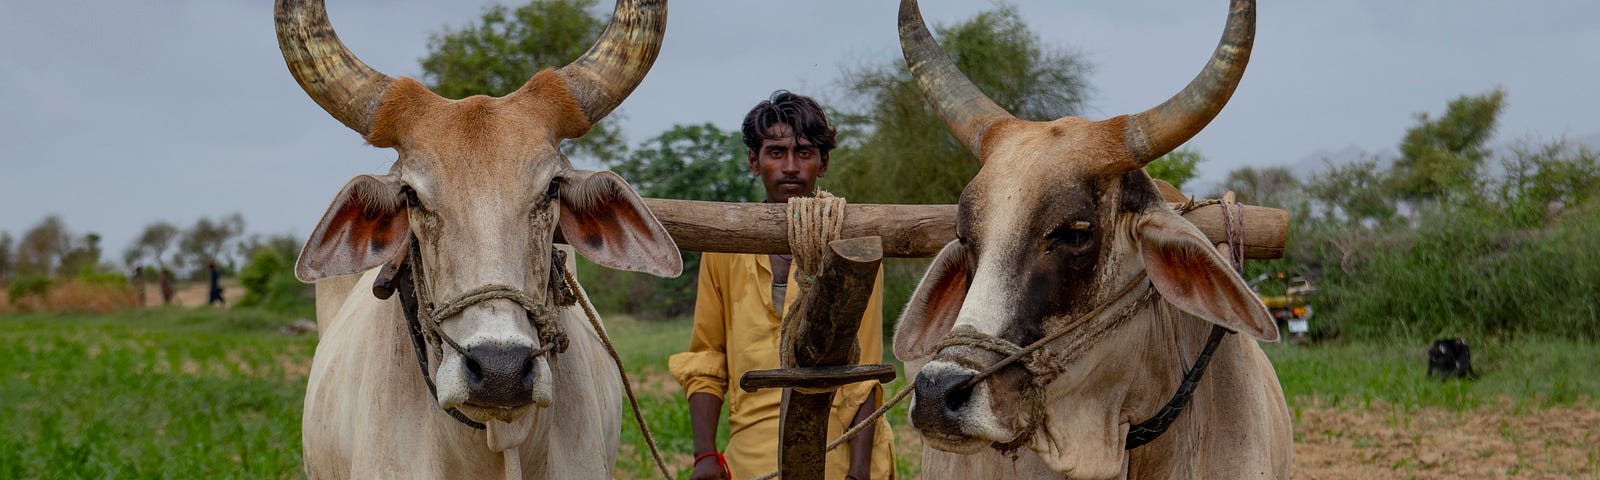 Two oxen yoked together and an Indian man standing behind their plow.